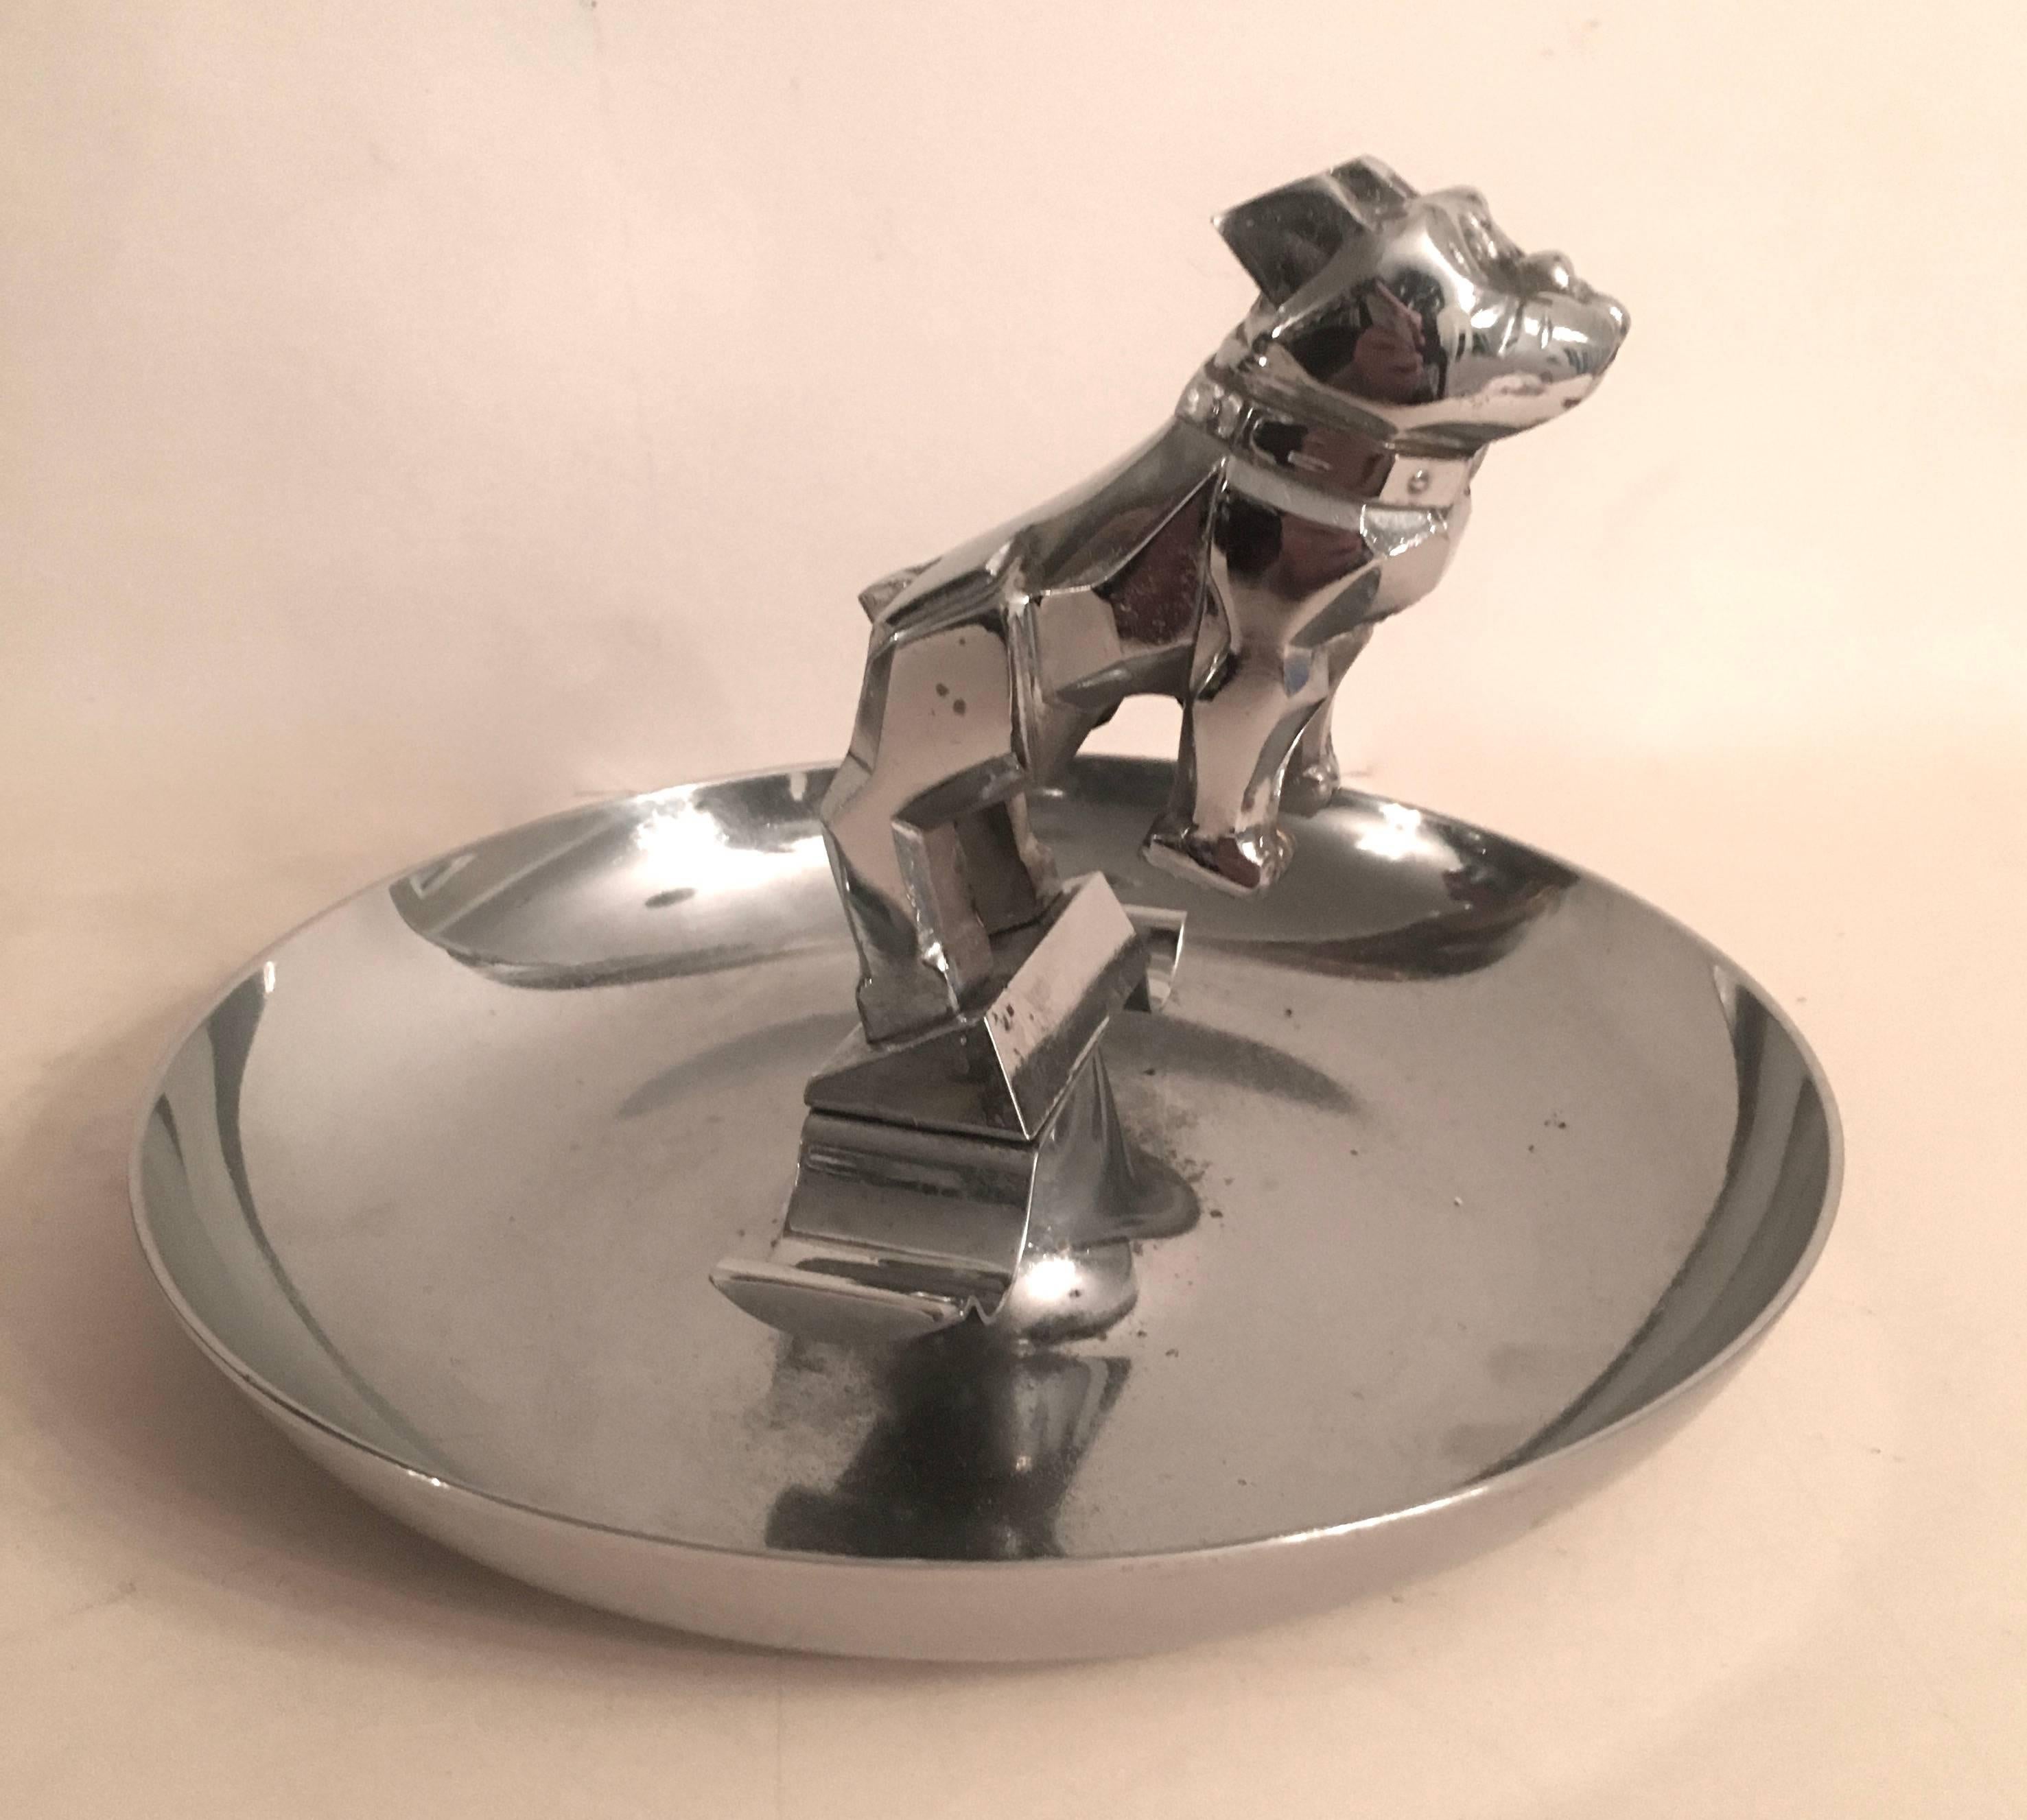 Mack truck hood ornament bulldog cigar ashtray.
Cigars are chic bulldogs don't bite and Marijuana is legal - grab a beer or your favorite port and screw the naysayers.

Light up and let this bulldog do his job, collecting ashes and compliments in